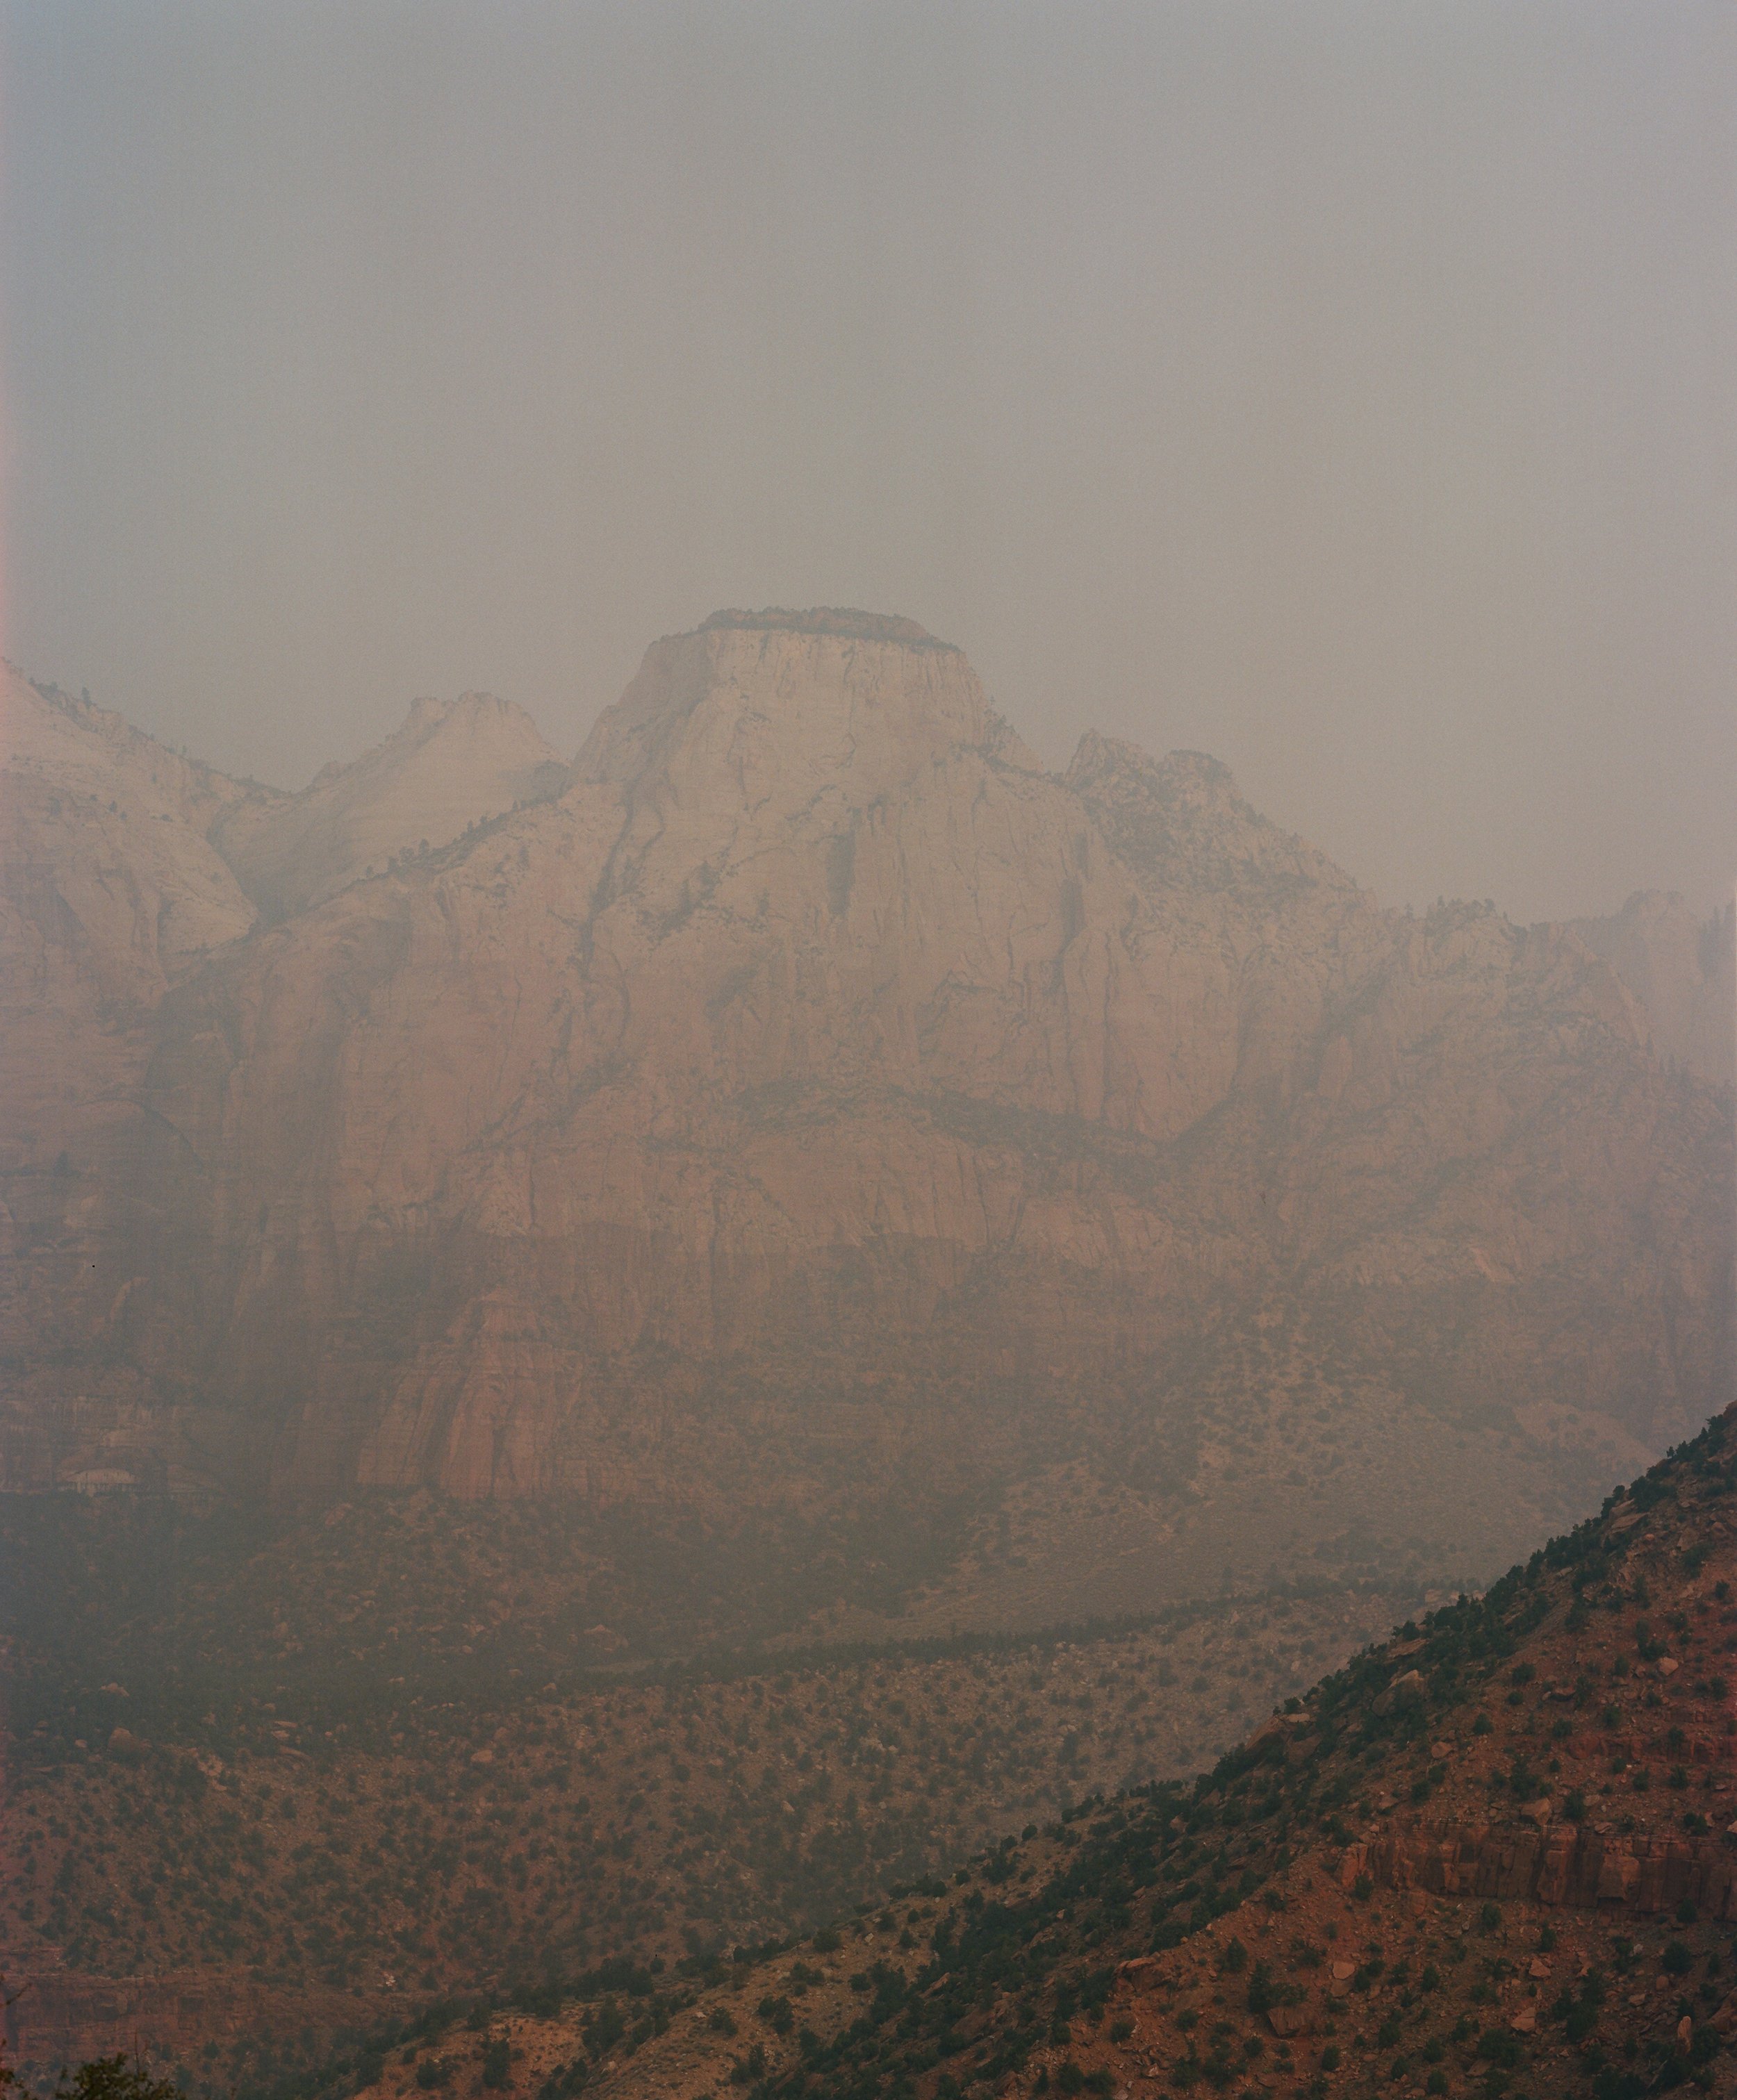   Smoke From Wildfires , Zion National Park, UT 2021 